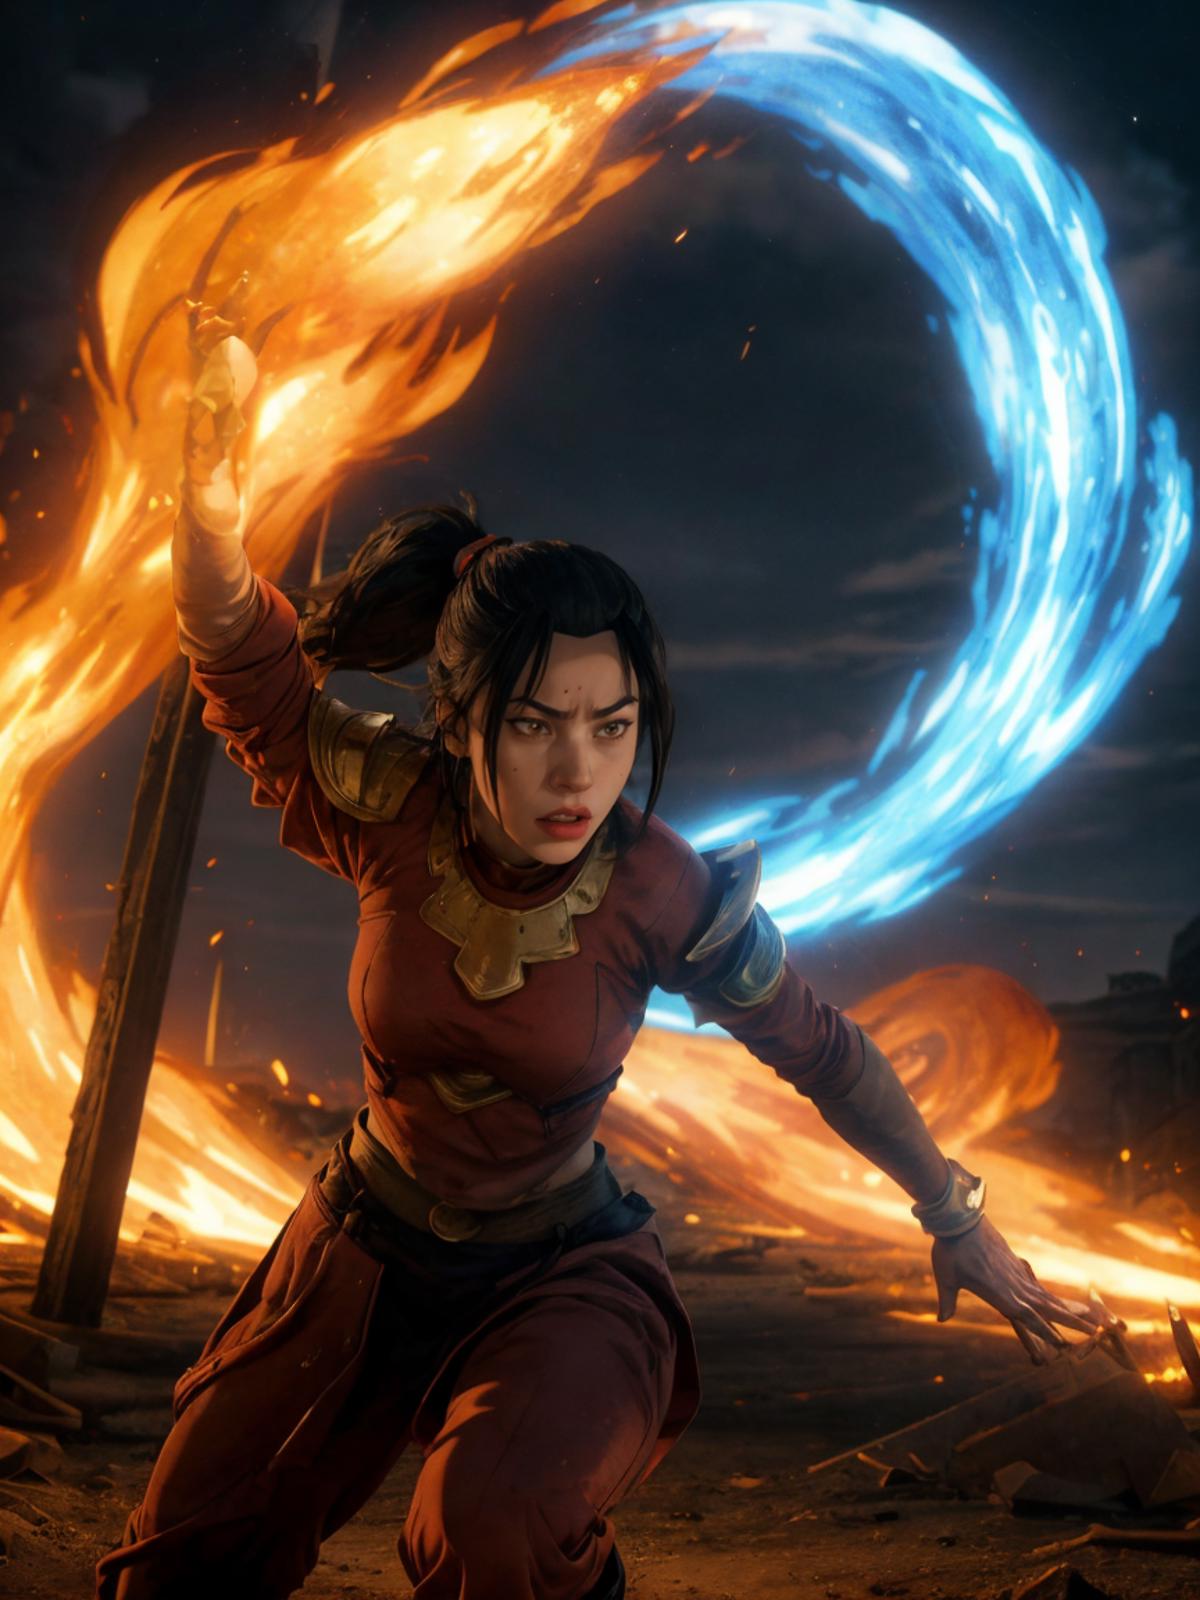 A woman in a red shirt and ponytail is surrounded by blue and orange flames.